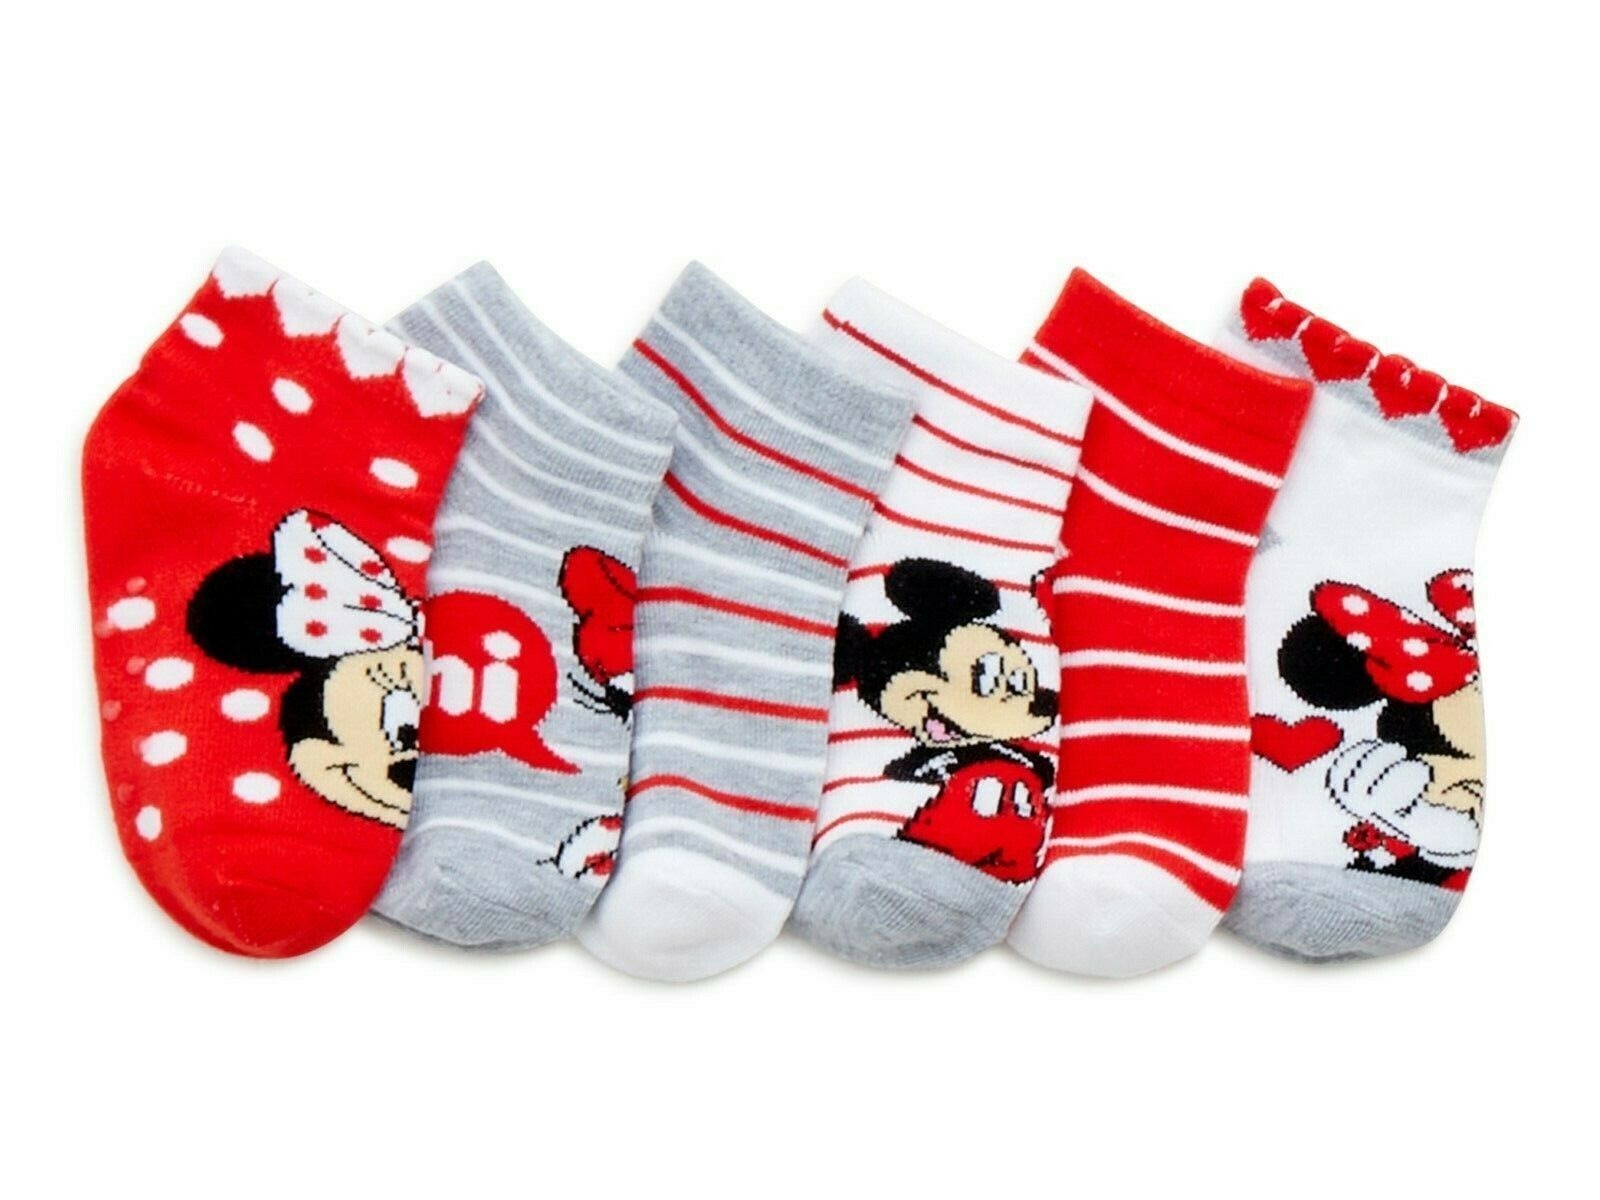 MINNIE MOUSE DISNEY JUNIOR 6-Pack Low Cut Socks Girls Ages 2-4 (Toddler's 2T-4T)